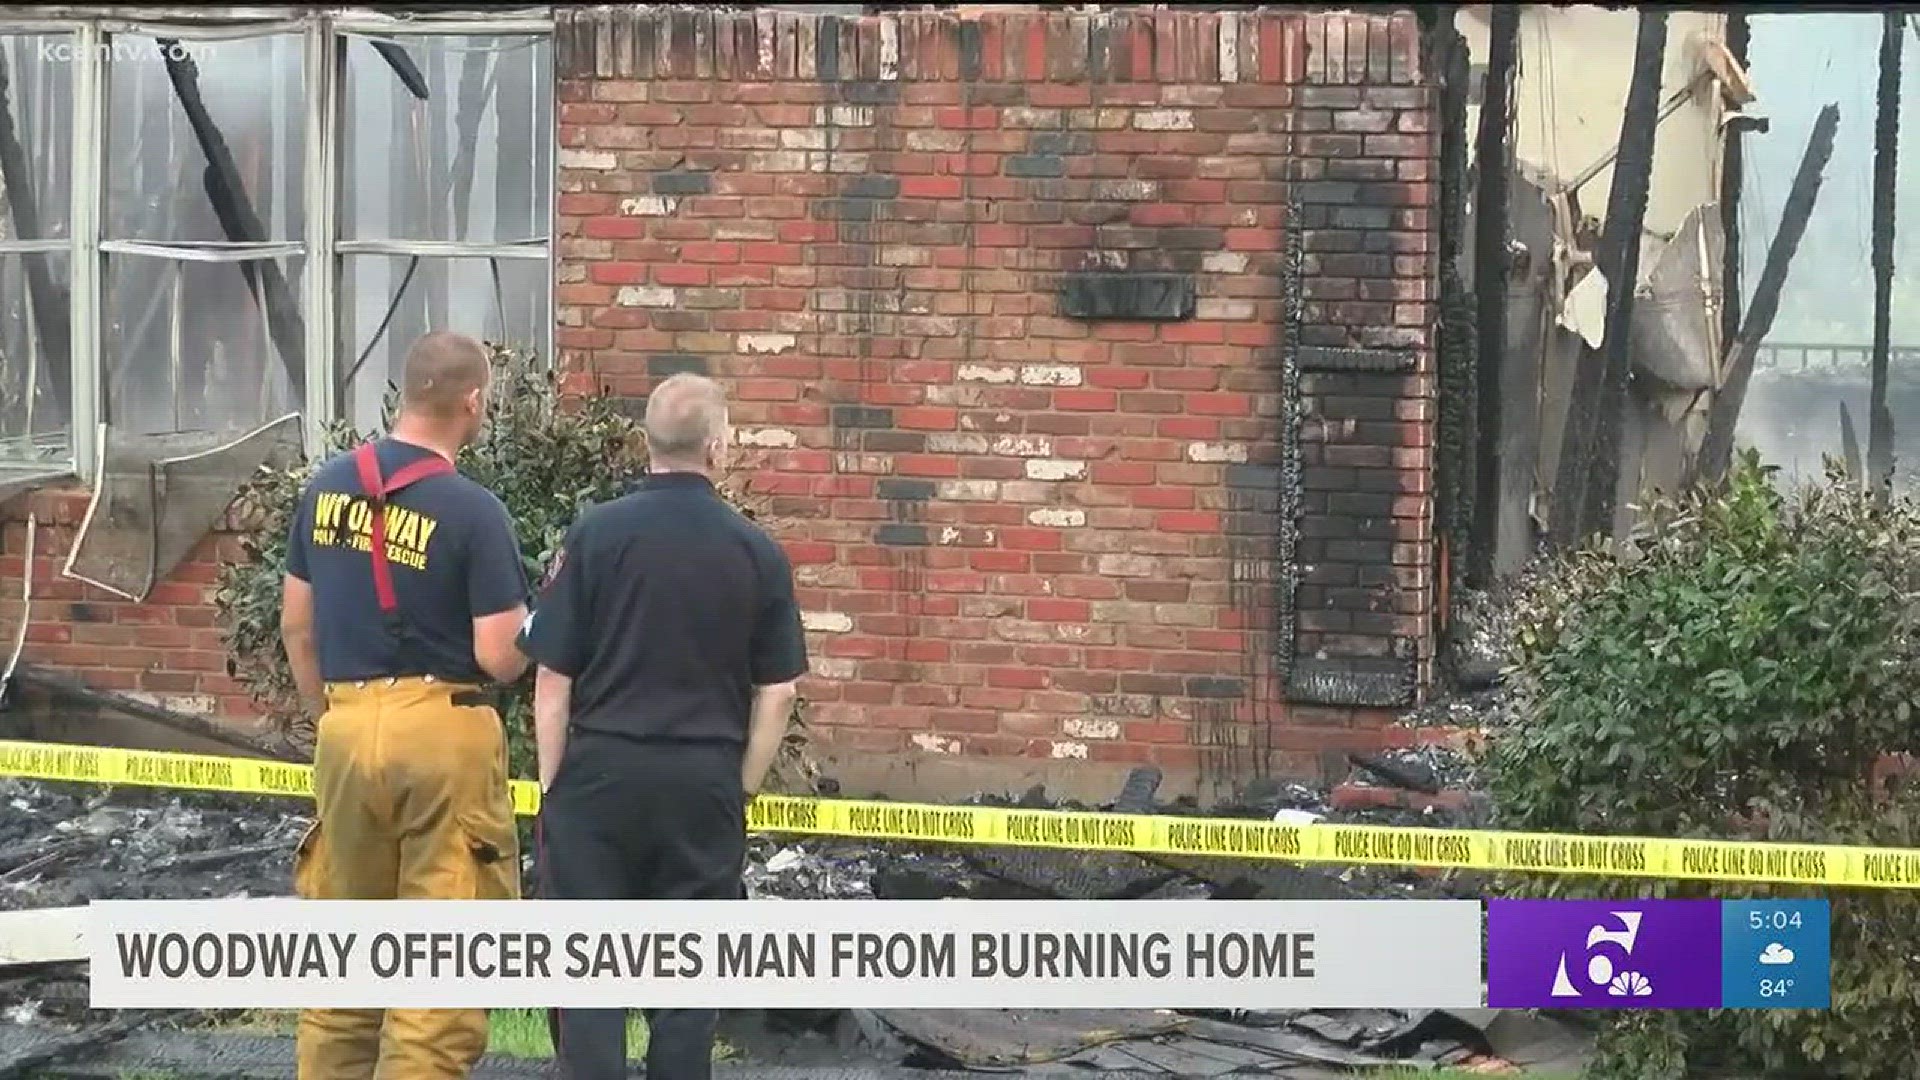 Officer Terry Mason responded to the house fire as a police officer, but his training as a firefighter was what helped him save a man's life.